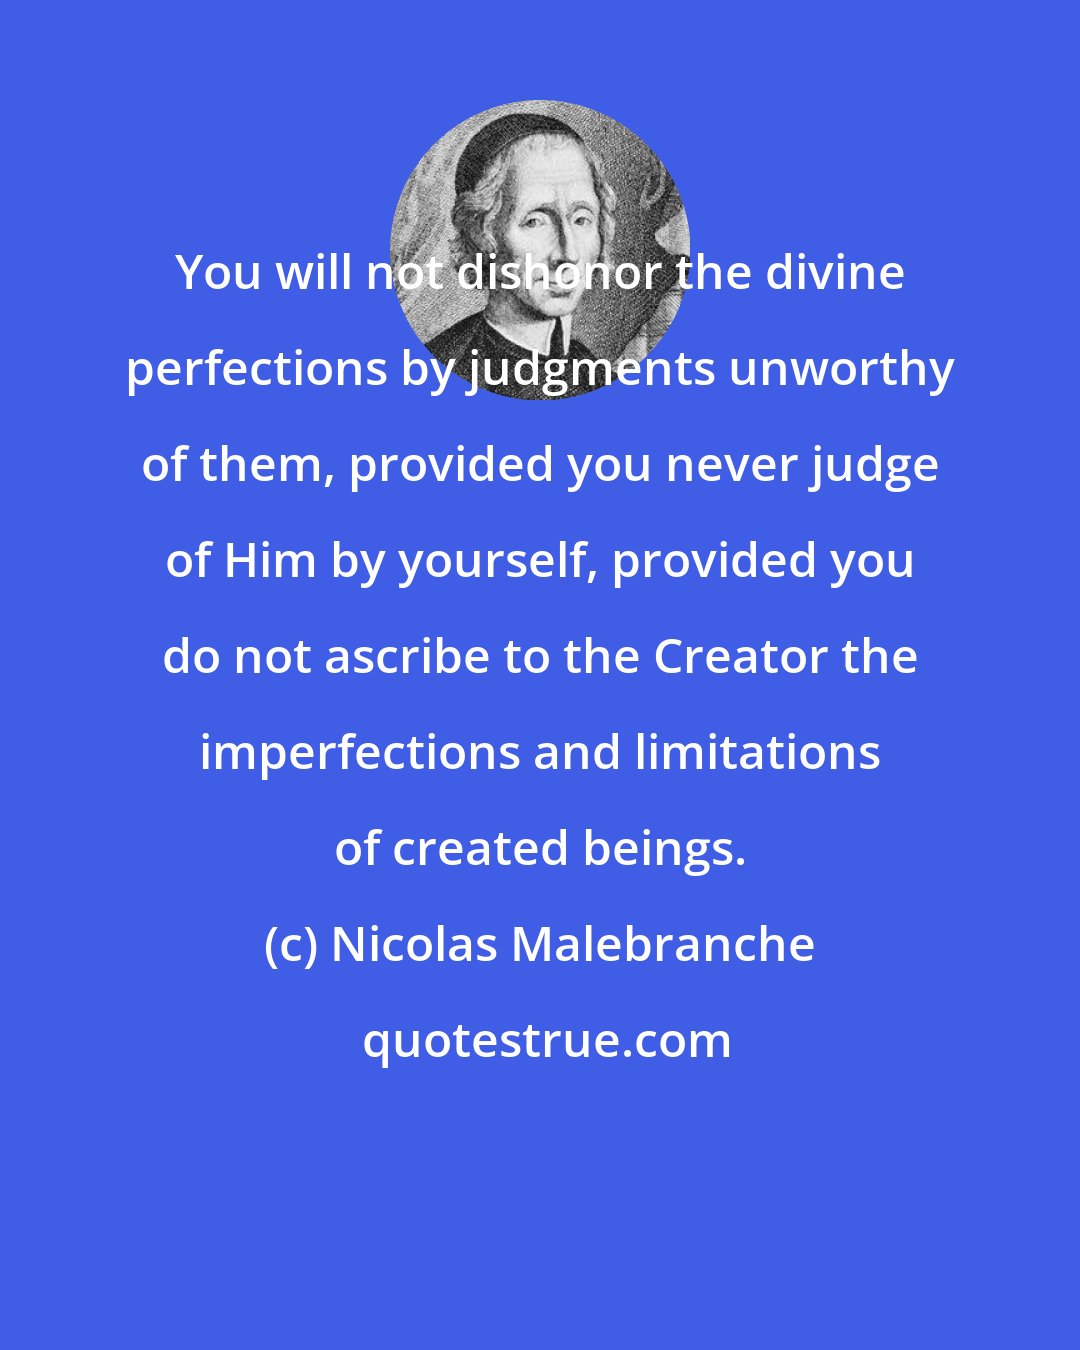 Nicolas Malebranche: You will not dishonor the divine perfections by judgments unworthy of them, provided you never judge of Him by yourself, provided you do not ascribe to the Creator the imperfections and limitations of created beings.